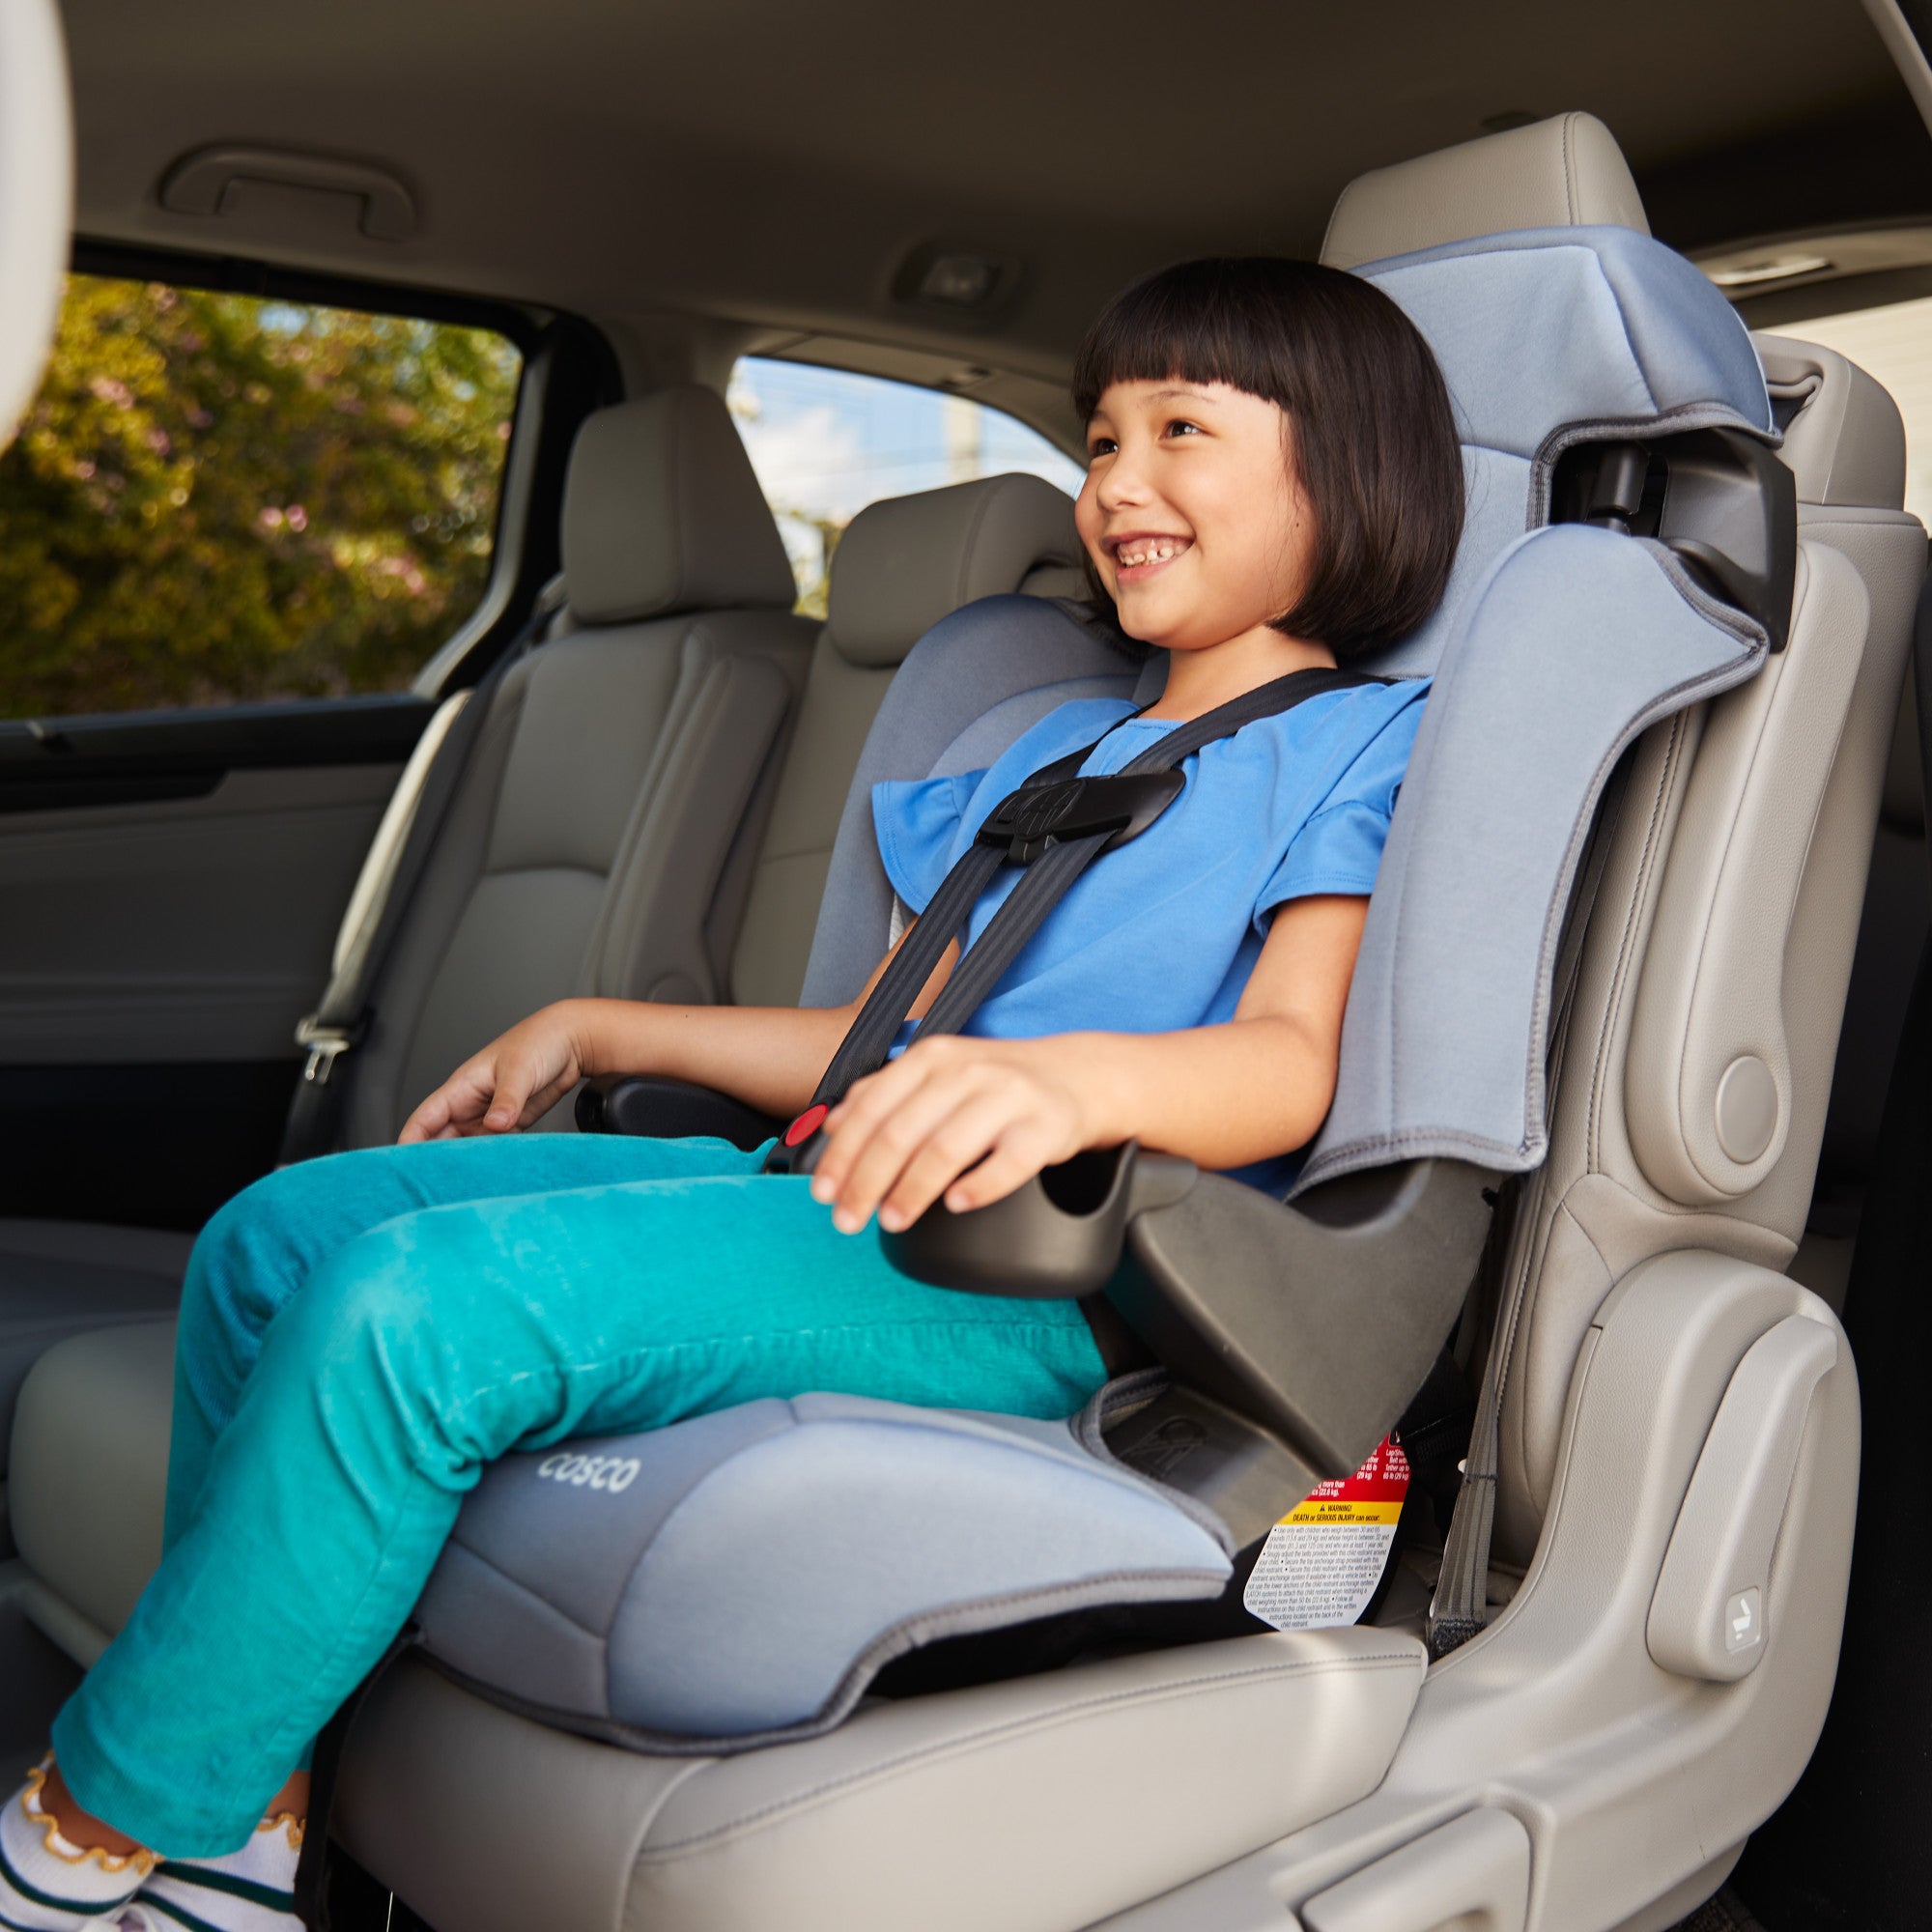 Cosco Kids™ Finale DX 2-in-1 Booster Car Seat - 45 degree angle view of child smiling in car seat